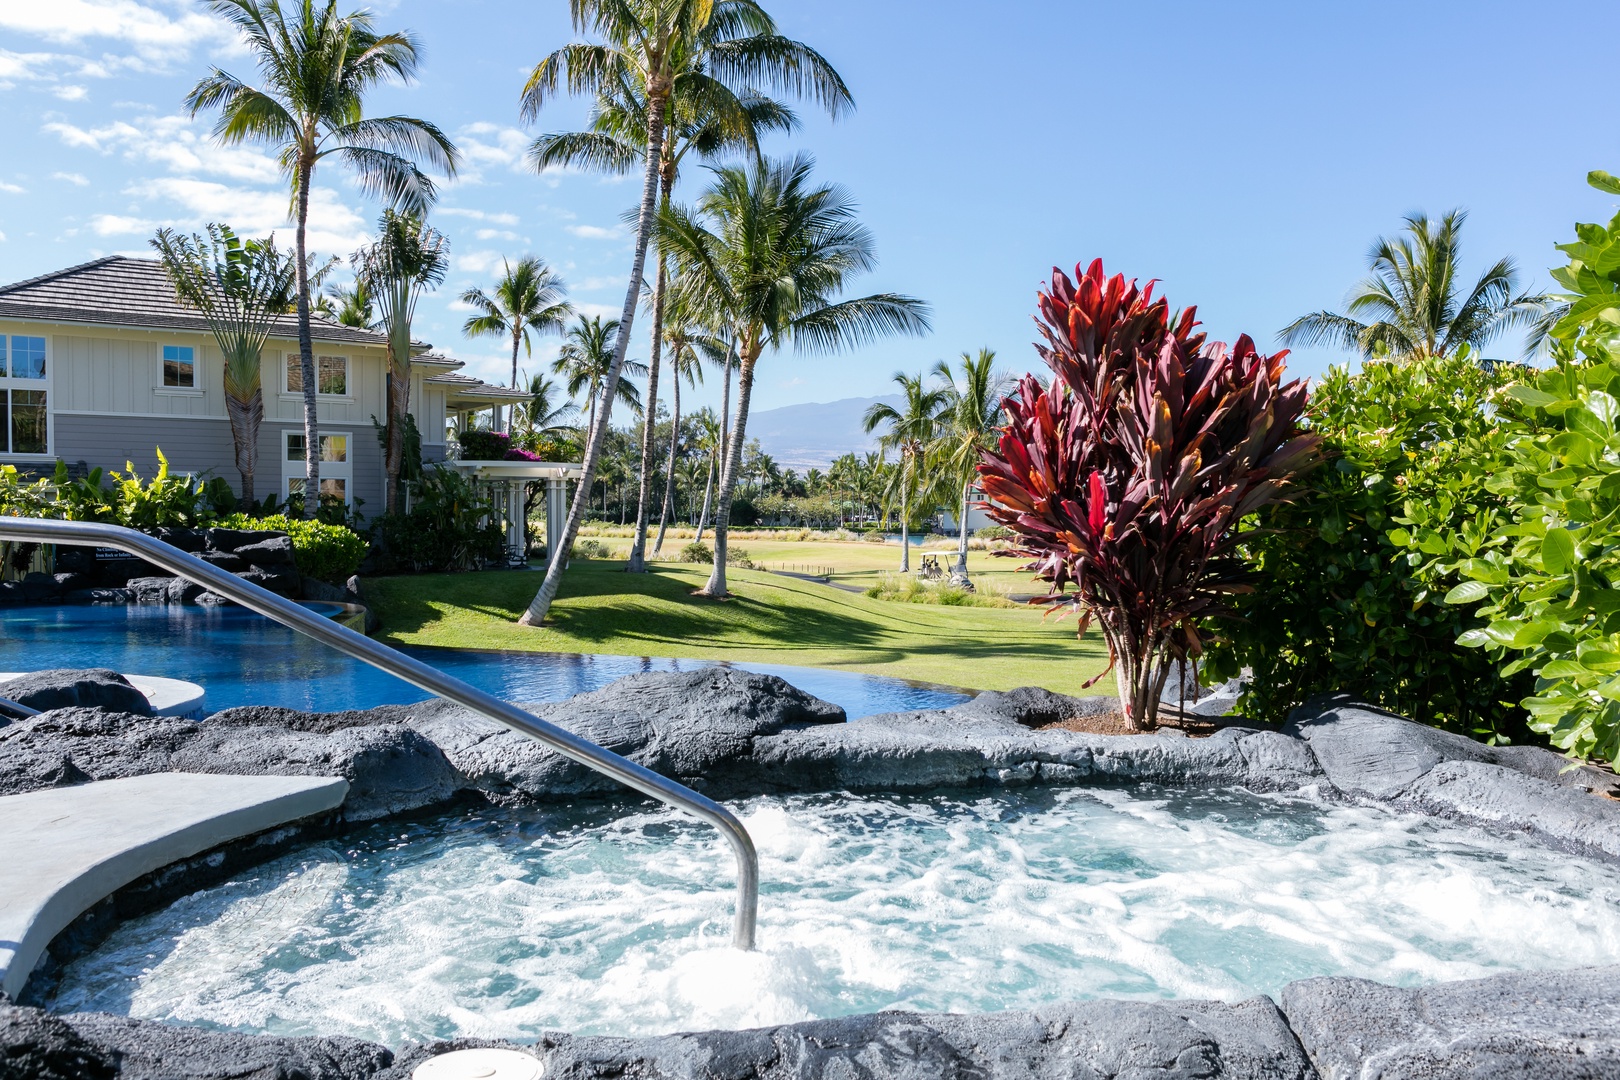 Waikoloa Vacation Rentals, Fairway Villas at Waikoloa Beach Resort E34 - Soothe your muscles in the spa after a day of adventure